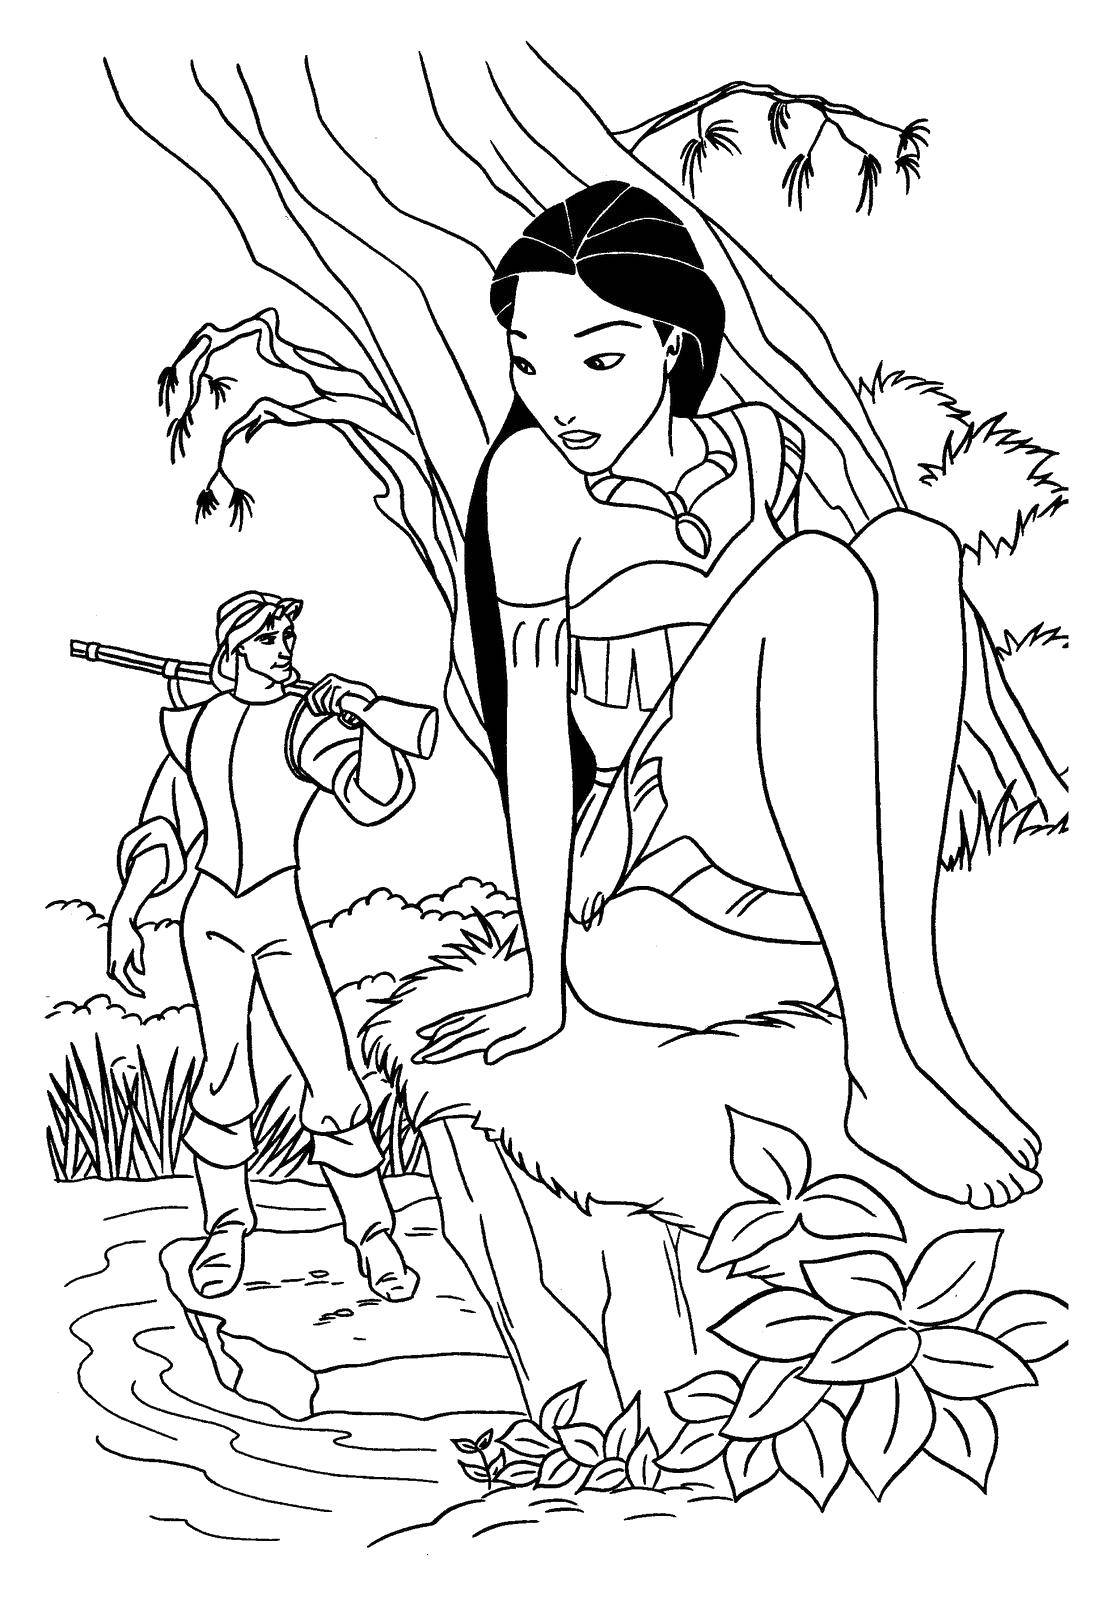 Coloring Mulan with her lover. Category Disney coloring pages. Tags:  Disney, Mulan.